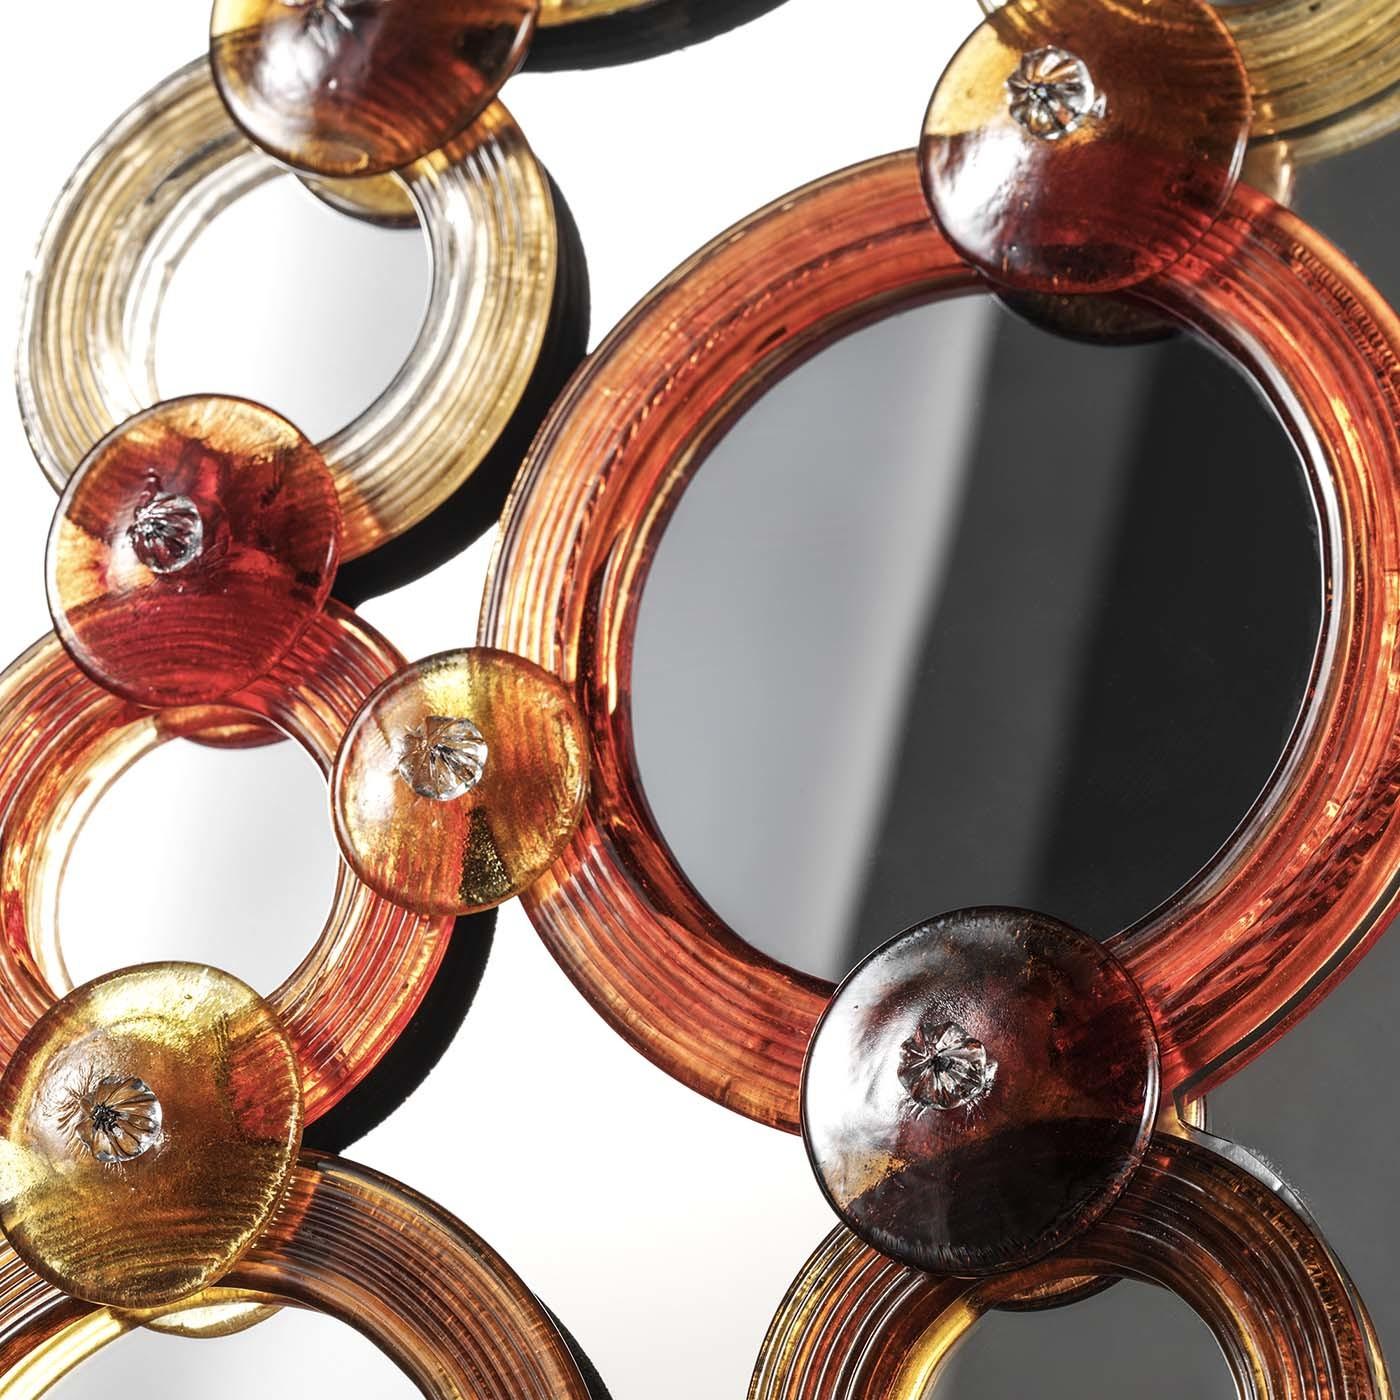 Part of the Cerchi collection (circles in English), this stunning mirror is a modern interpretation of traditional Venetian artifacts. The rectangular frame of this piece comprises a series of round elements of different sizes that are applied on